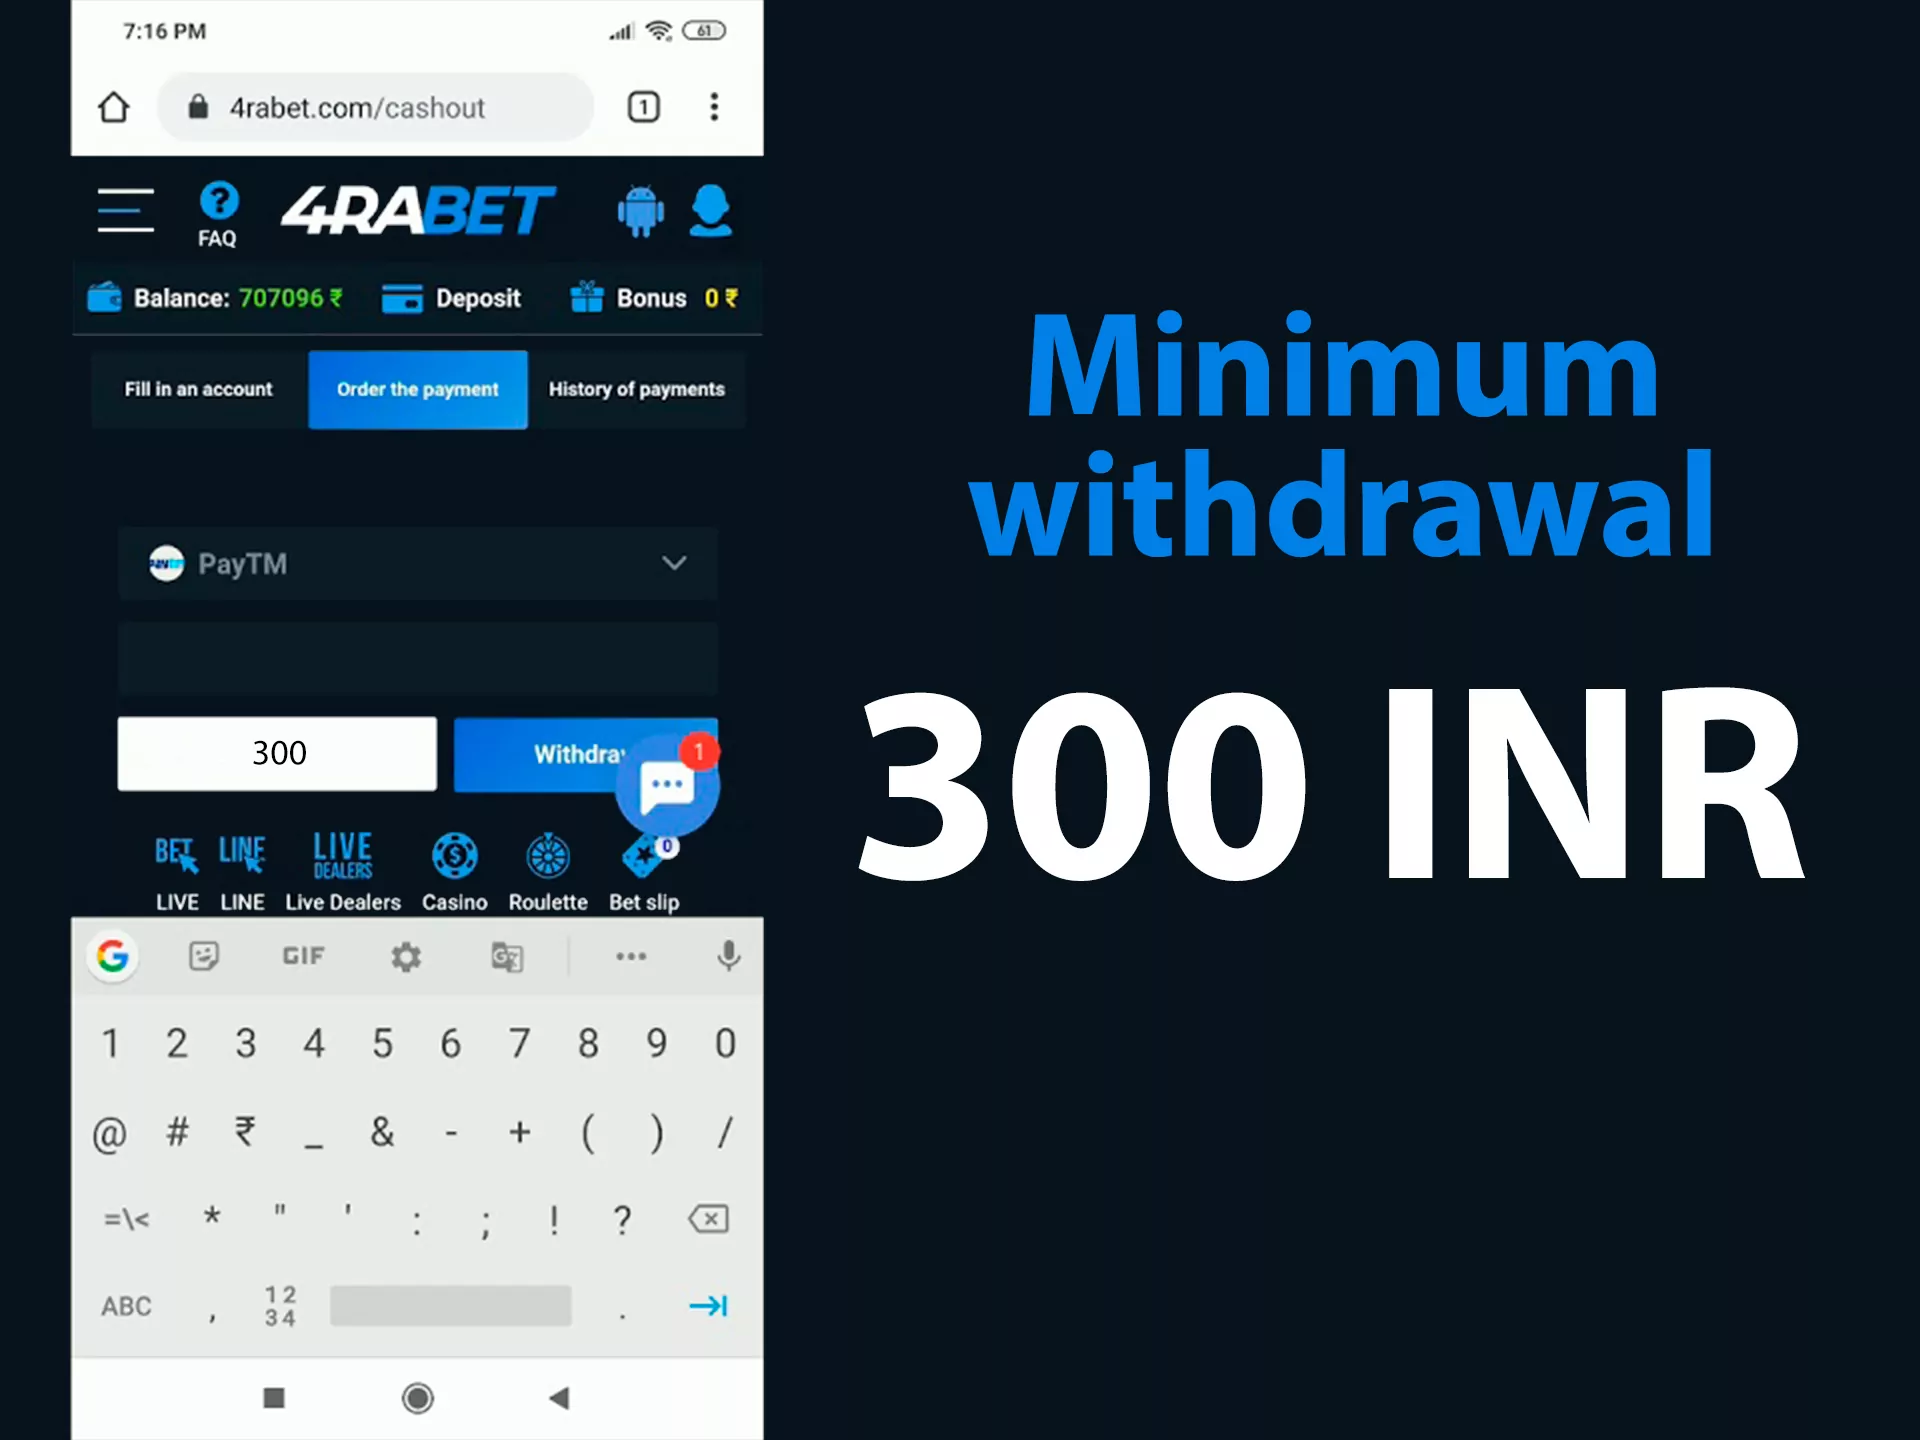 The minimum withdrawal limit is 300 INR, and the maximum is 10,000 INR.